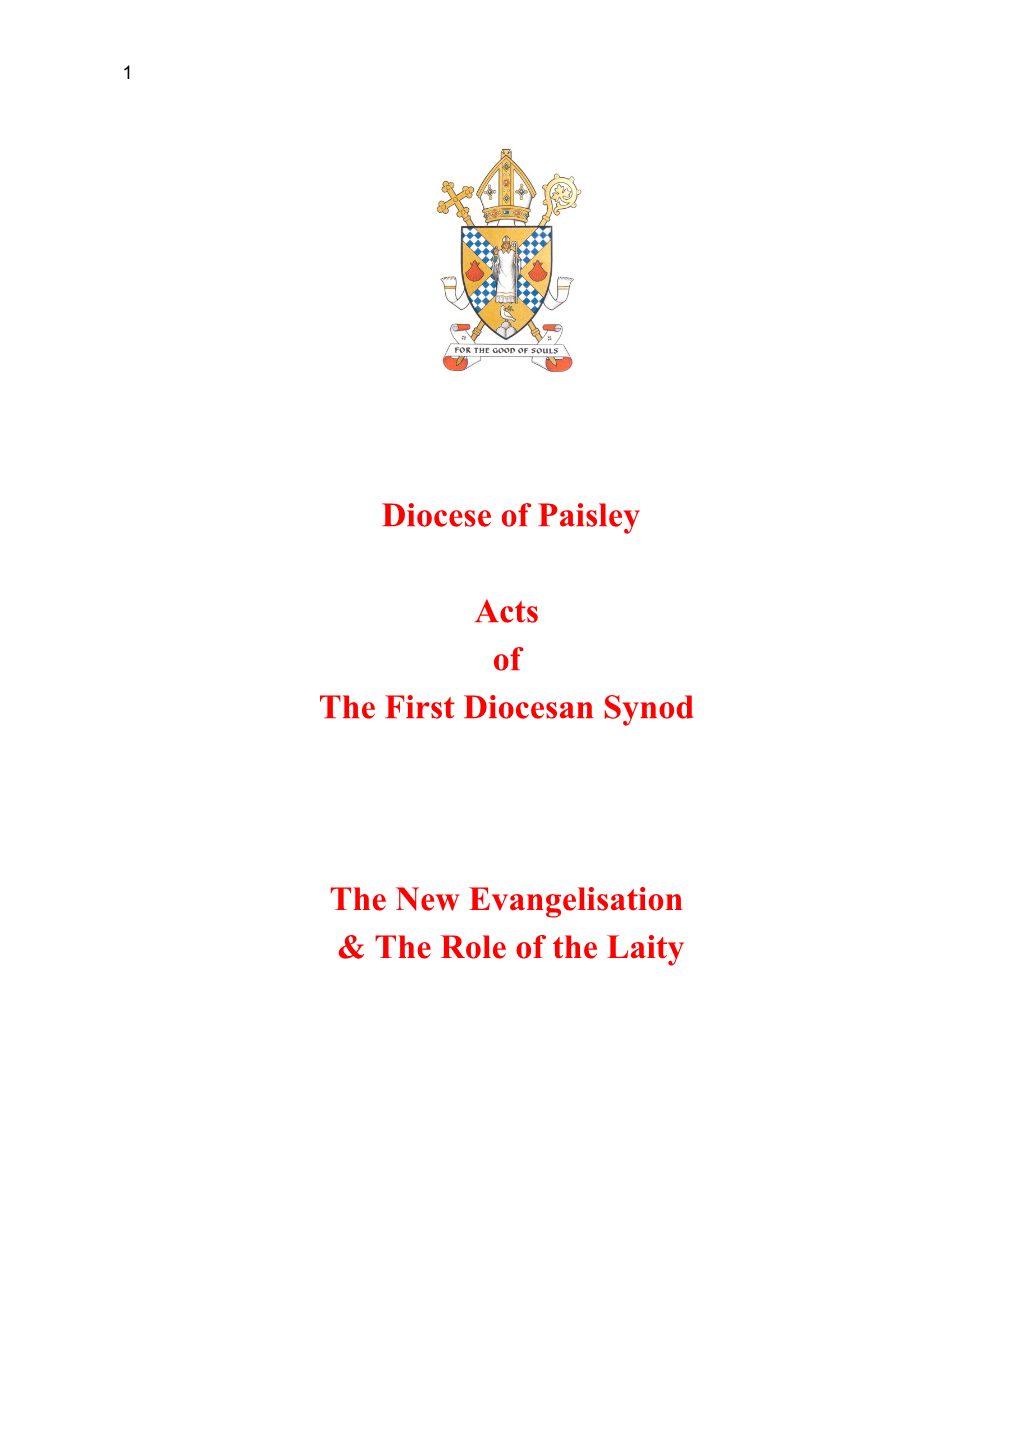 The First Diocesan Synod s1